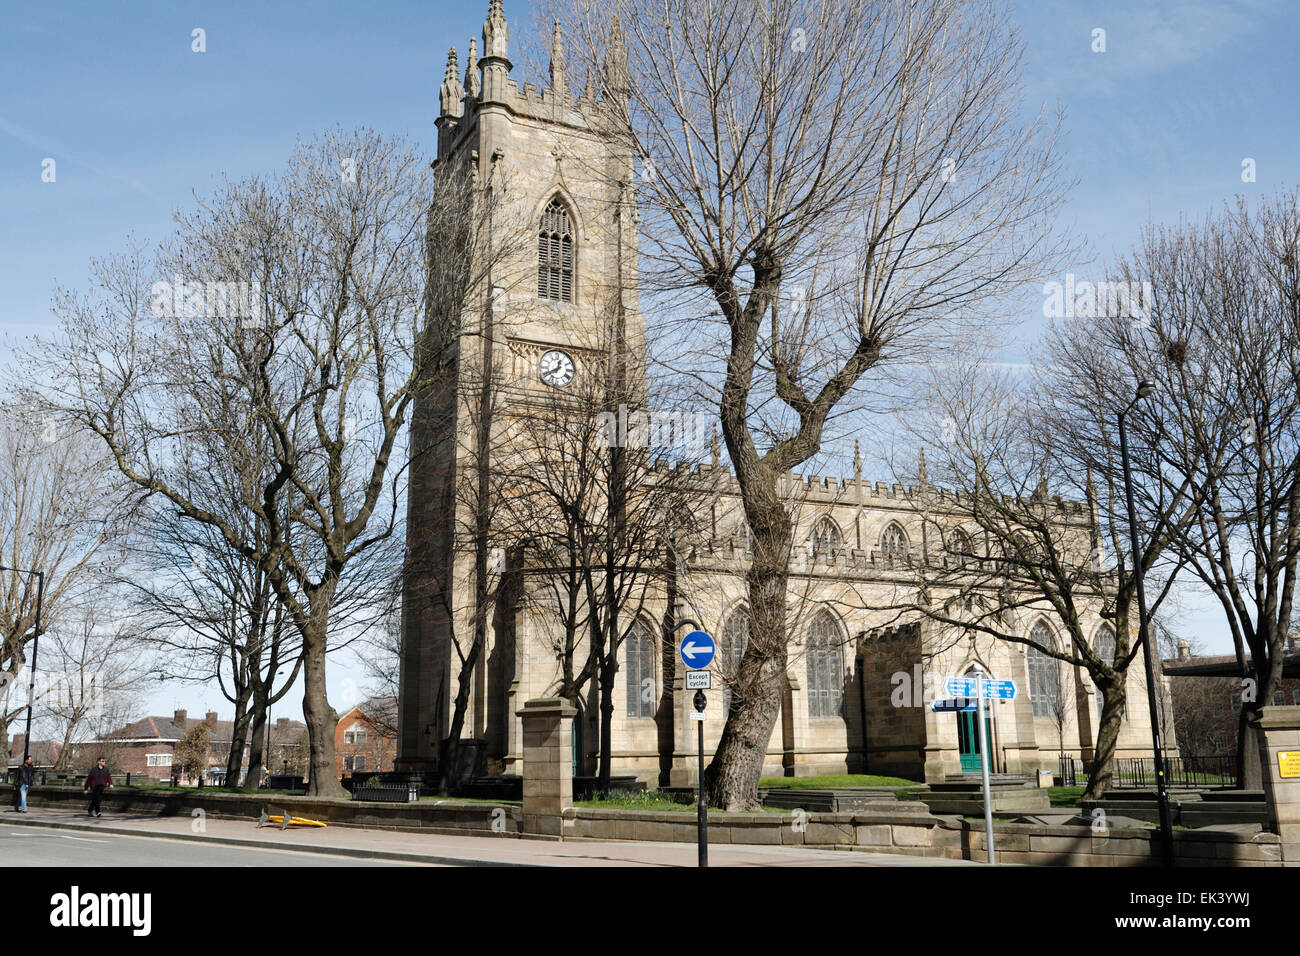 St Georges church in Sheffield England  is now a part of Sheffield University, Grade II listed building Stock Photo